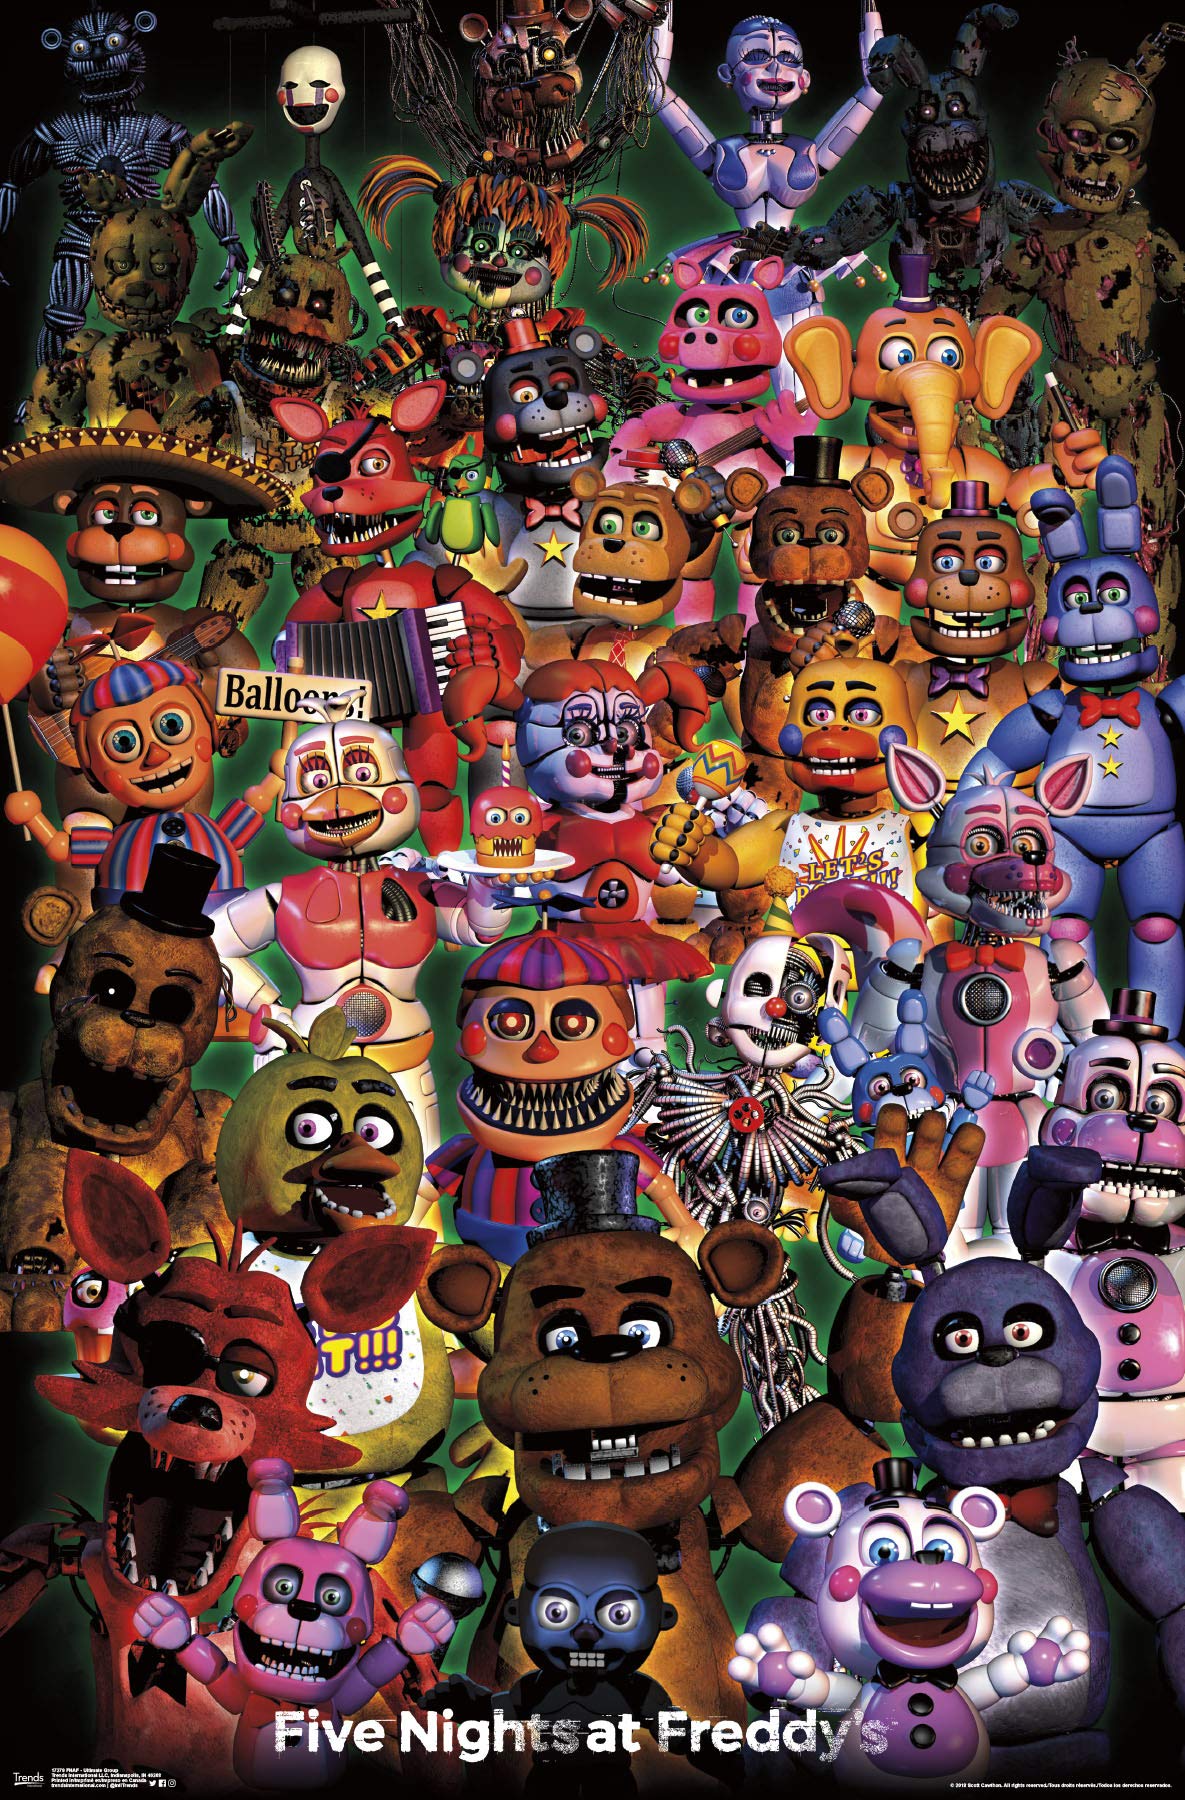 is five nights with 39 canon?